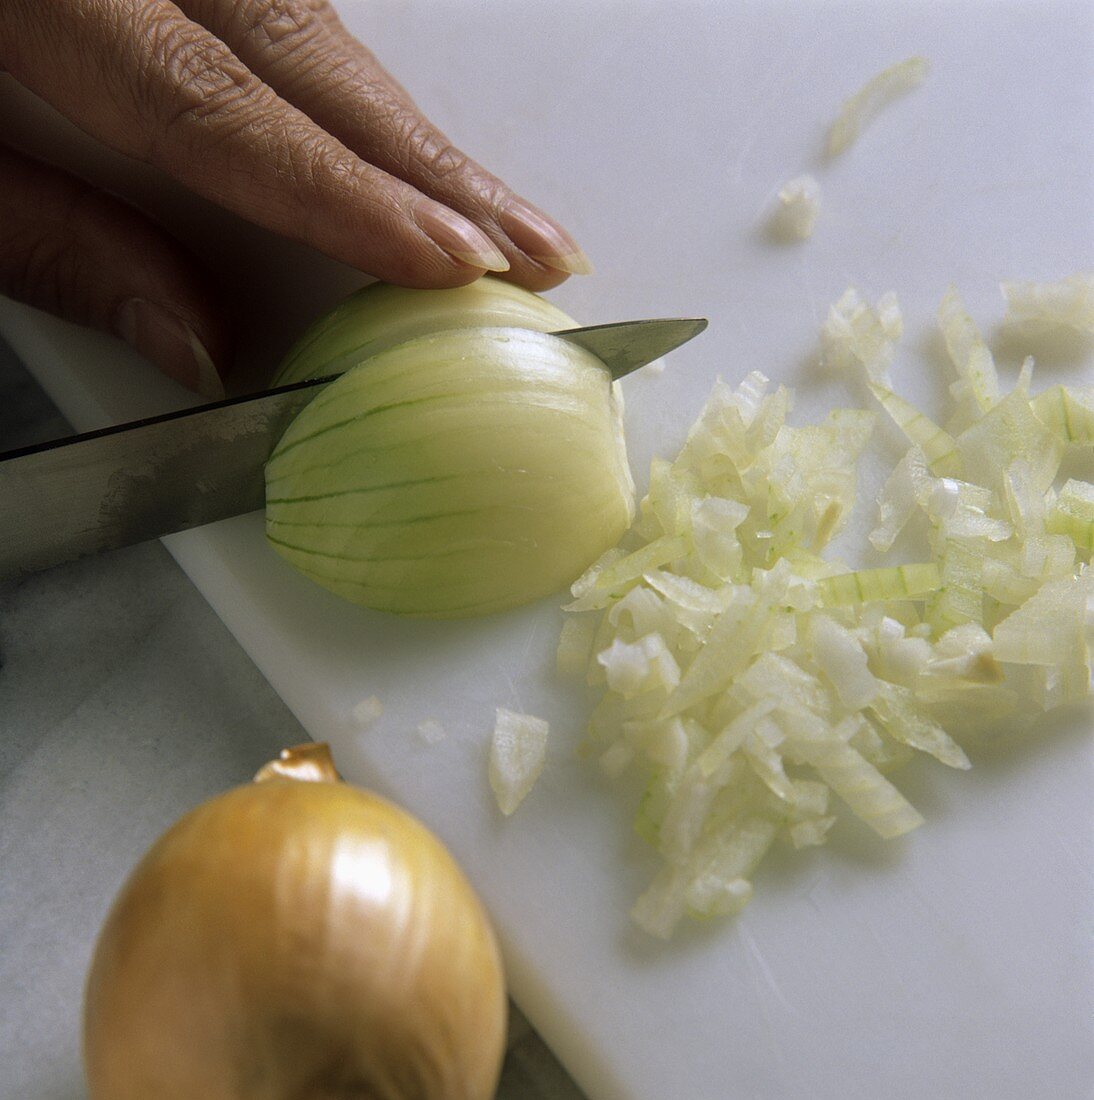 Dicing onions